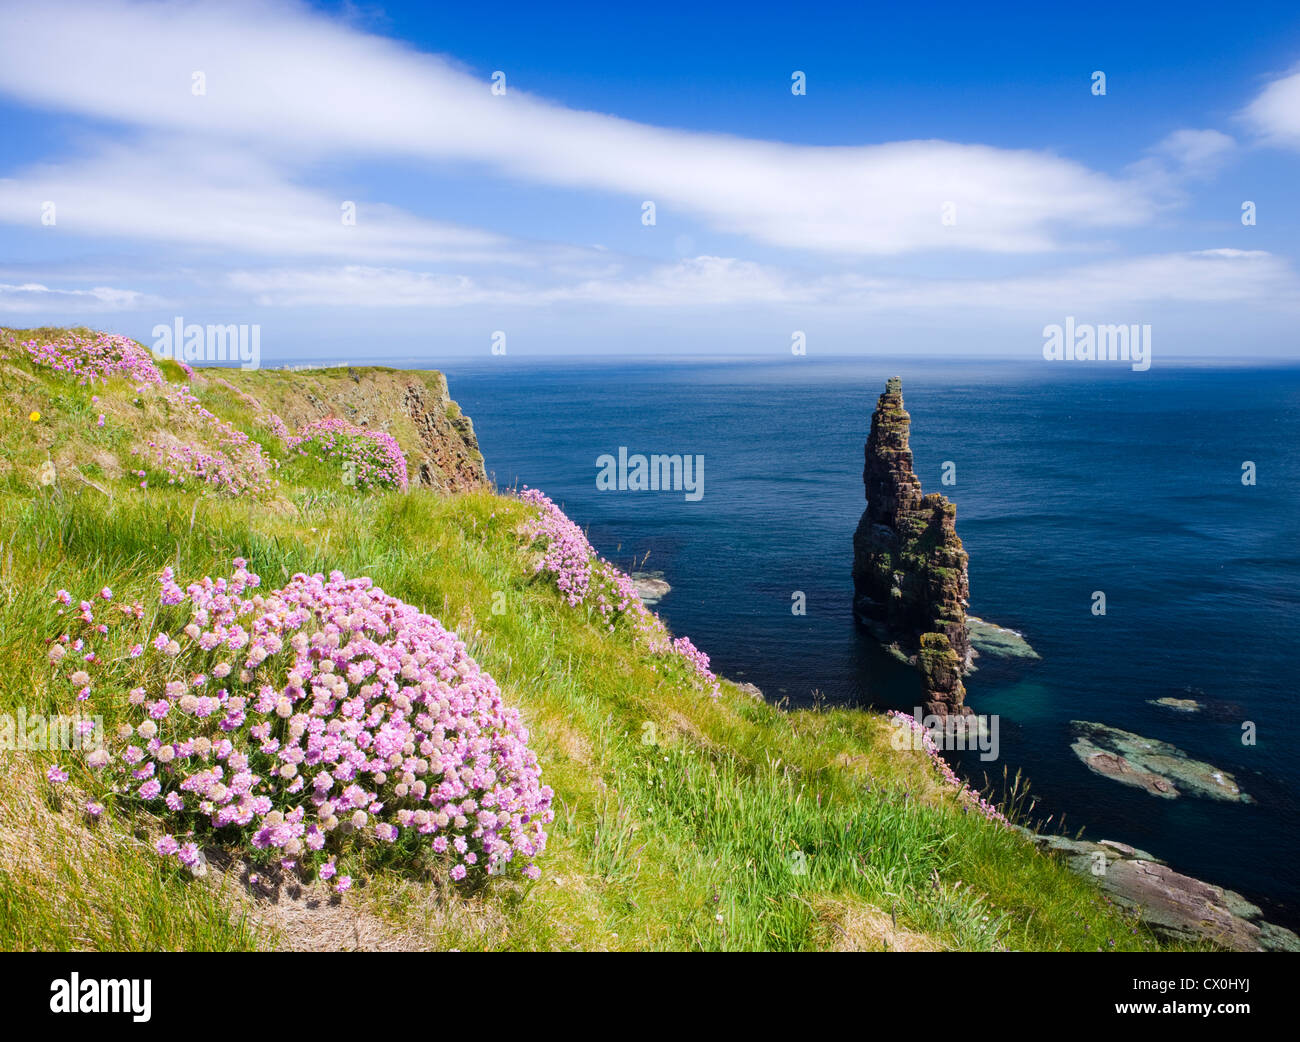 Stacks of Duncansby, near John o' Groats, Highland, Scotland, UK. Thrift in foreground. Stock Photo